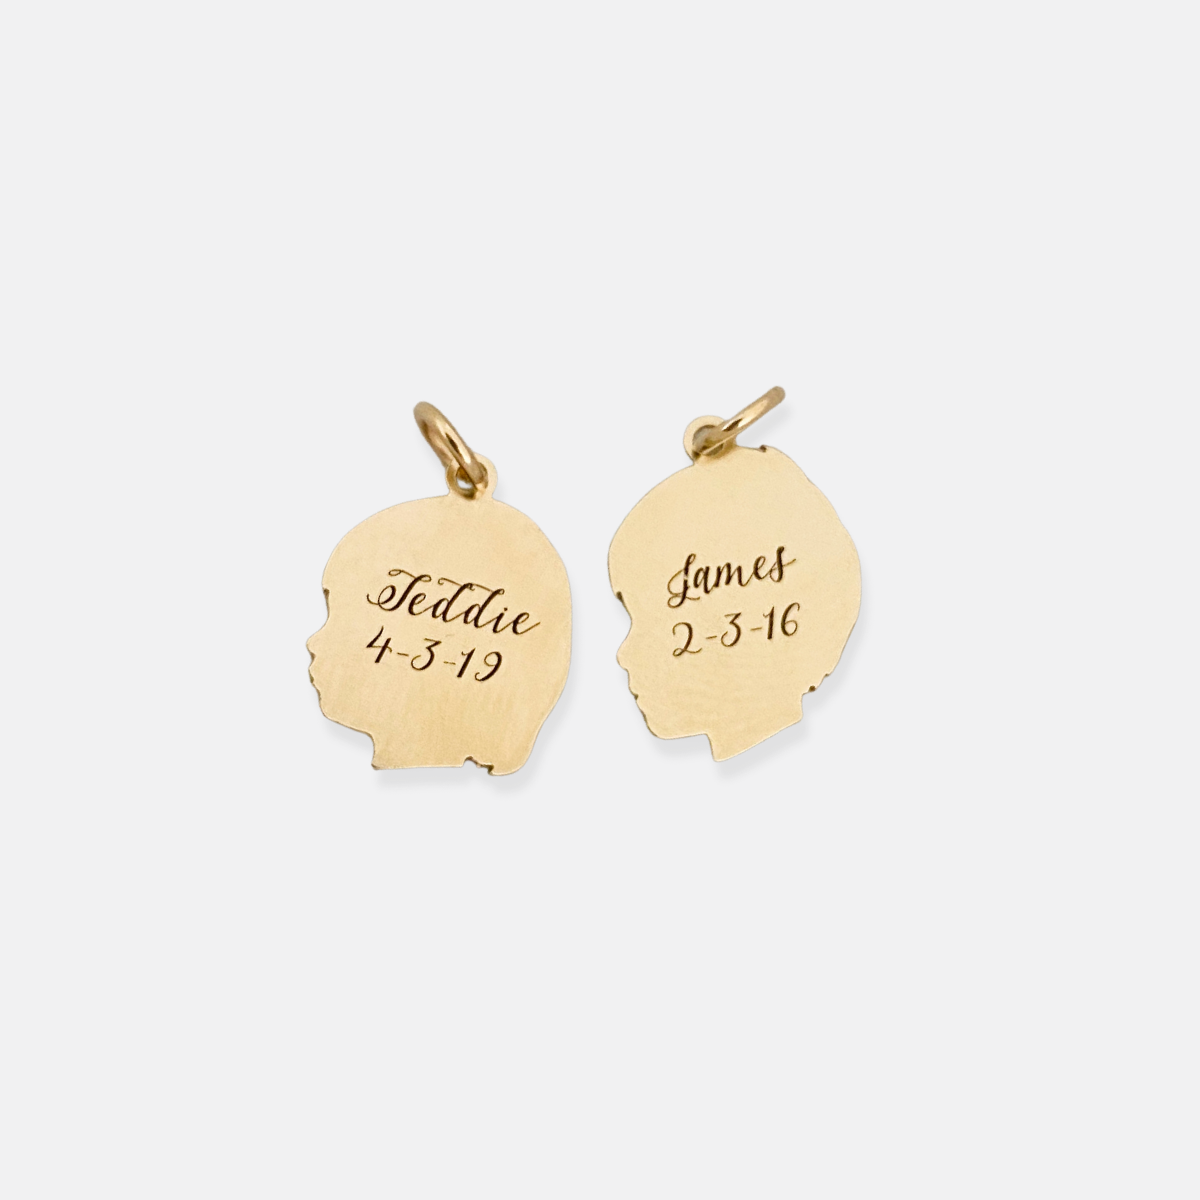 Bay & Stew Jewelry Supplies on Instagram: Our hand stamped tiny charms are  available in 50+ designs (and counting…). Choose sterling silver, gold  filled or rose gold filled. What other designs do